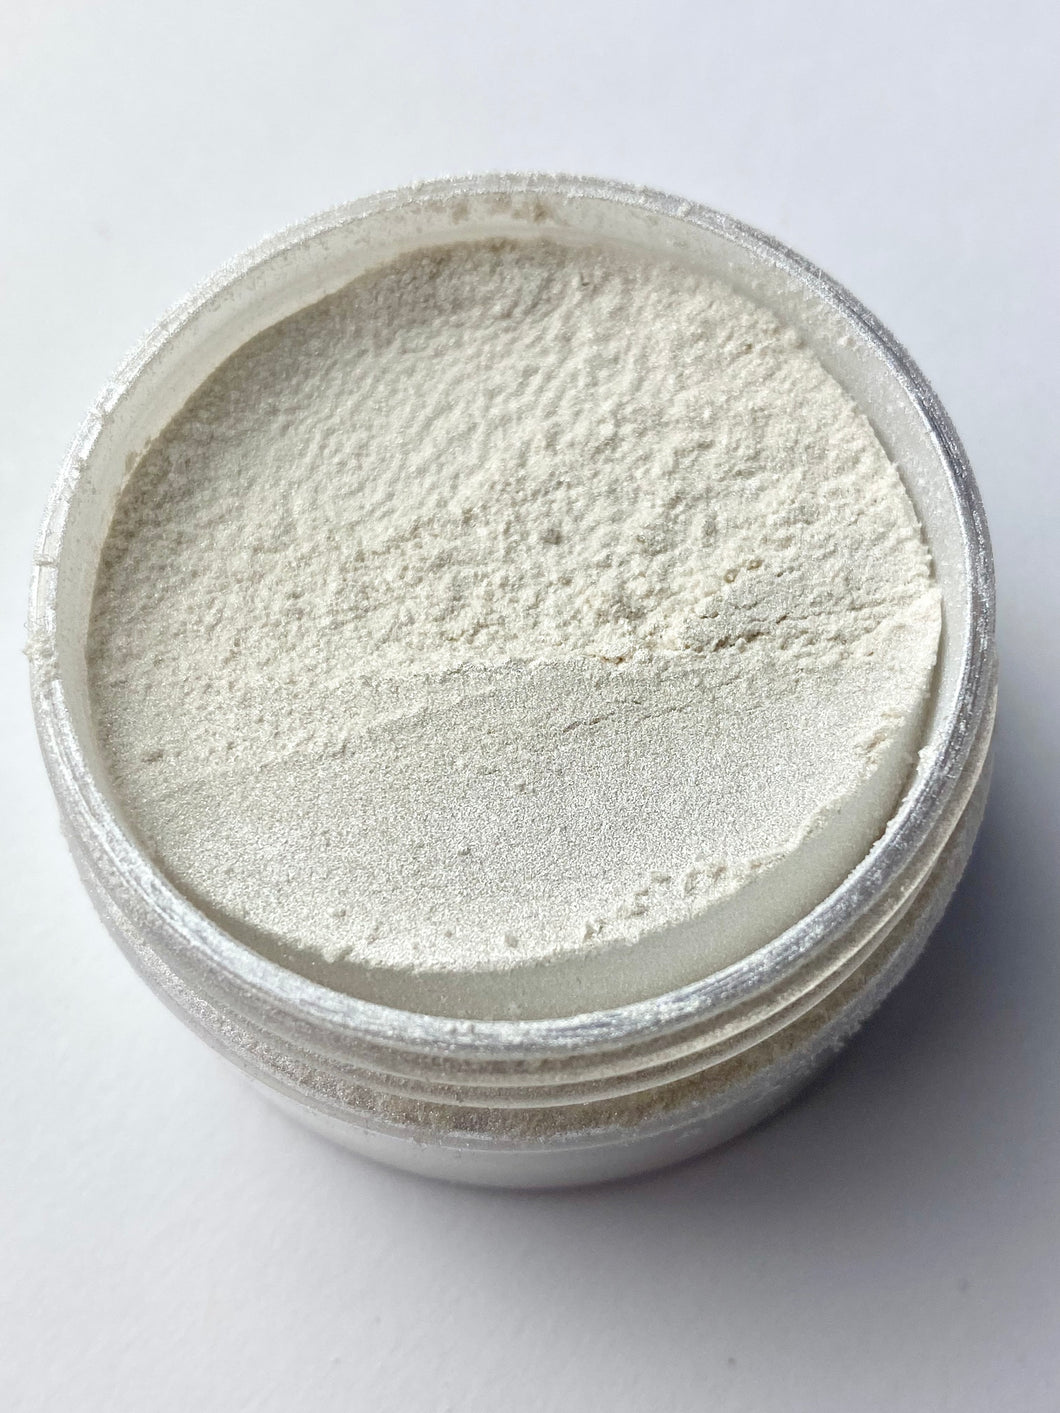 Pearlescent Mica Powder - 1 ounce jar - Luster